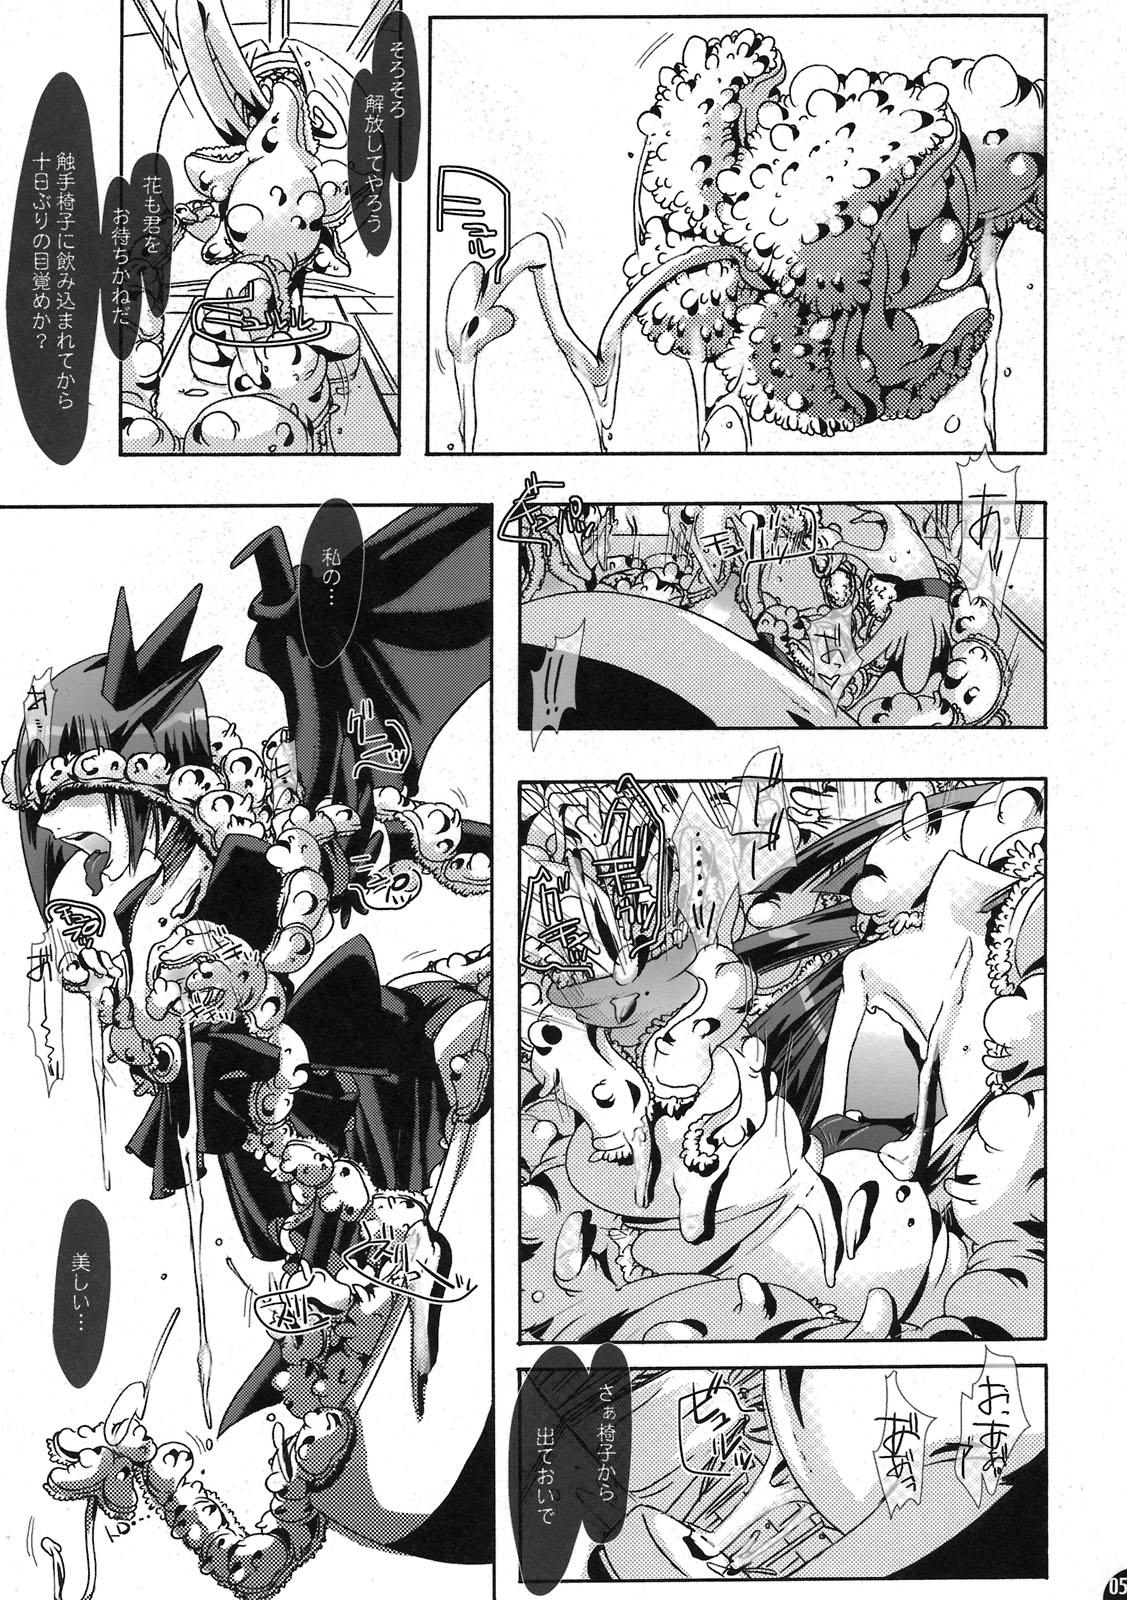 Hot Girl Pussy Shokushu in The Dark - Pretty cure Heartcatch precure Free Rough Sex - Page 5